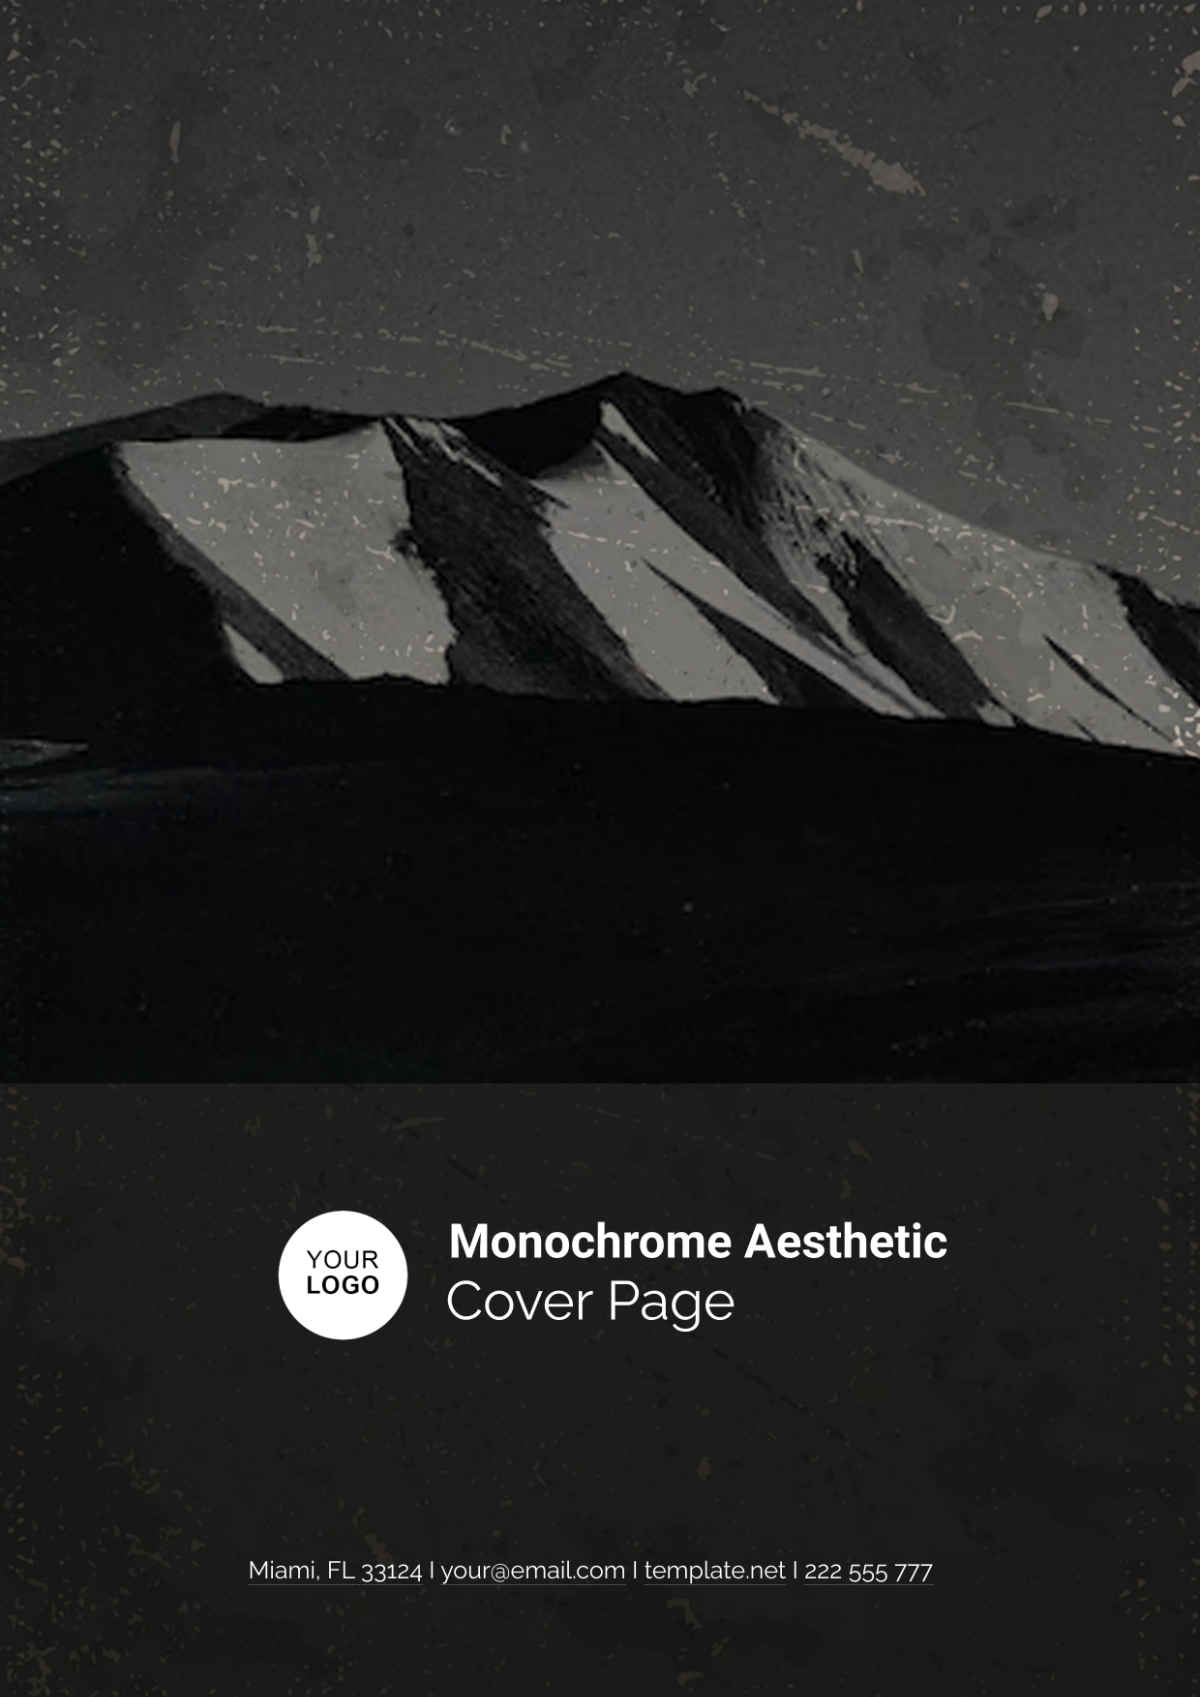 Monochrome Aesthetic Cover Page Template